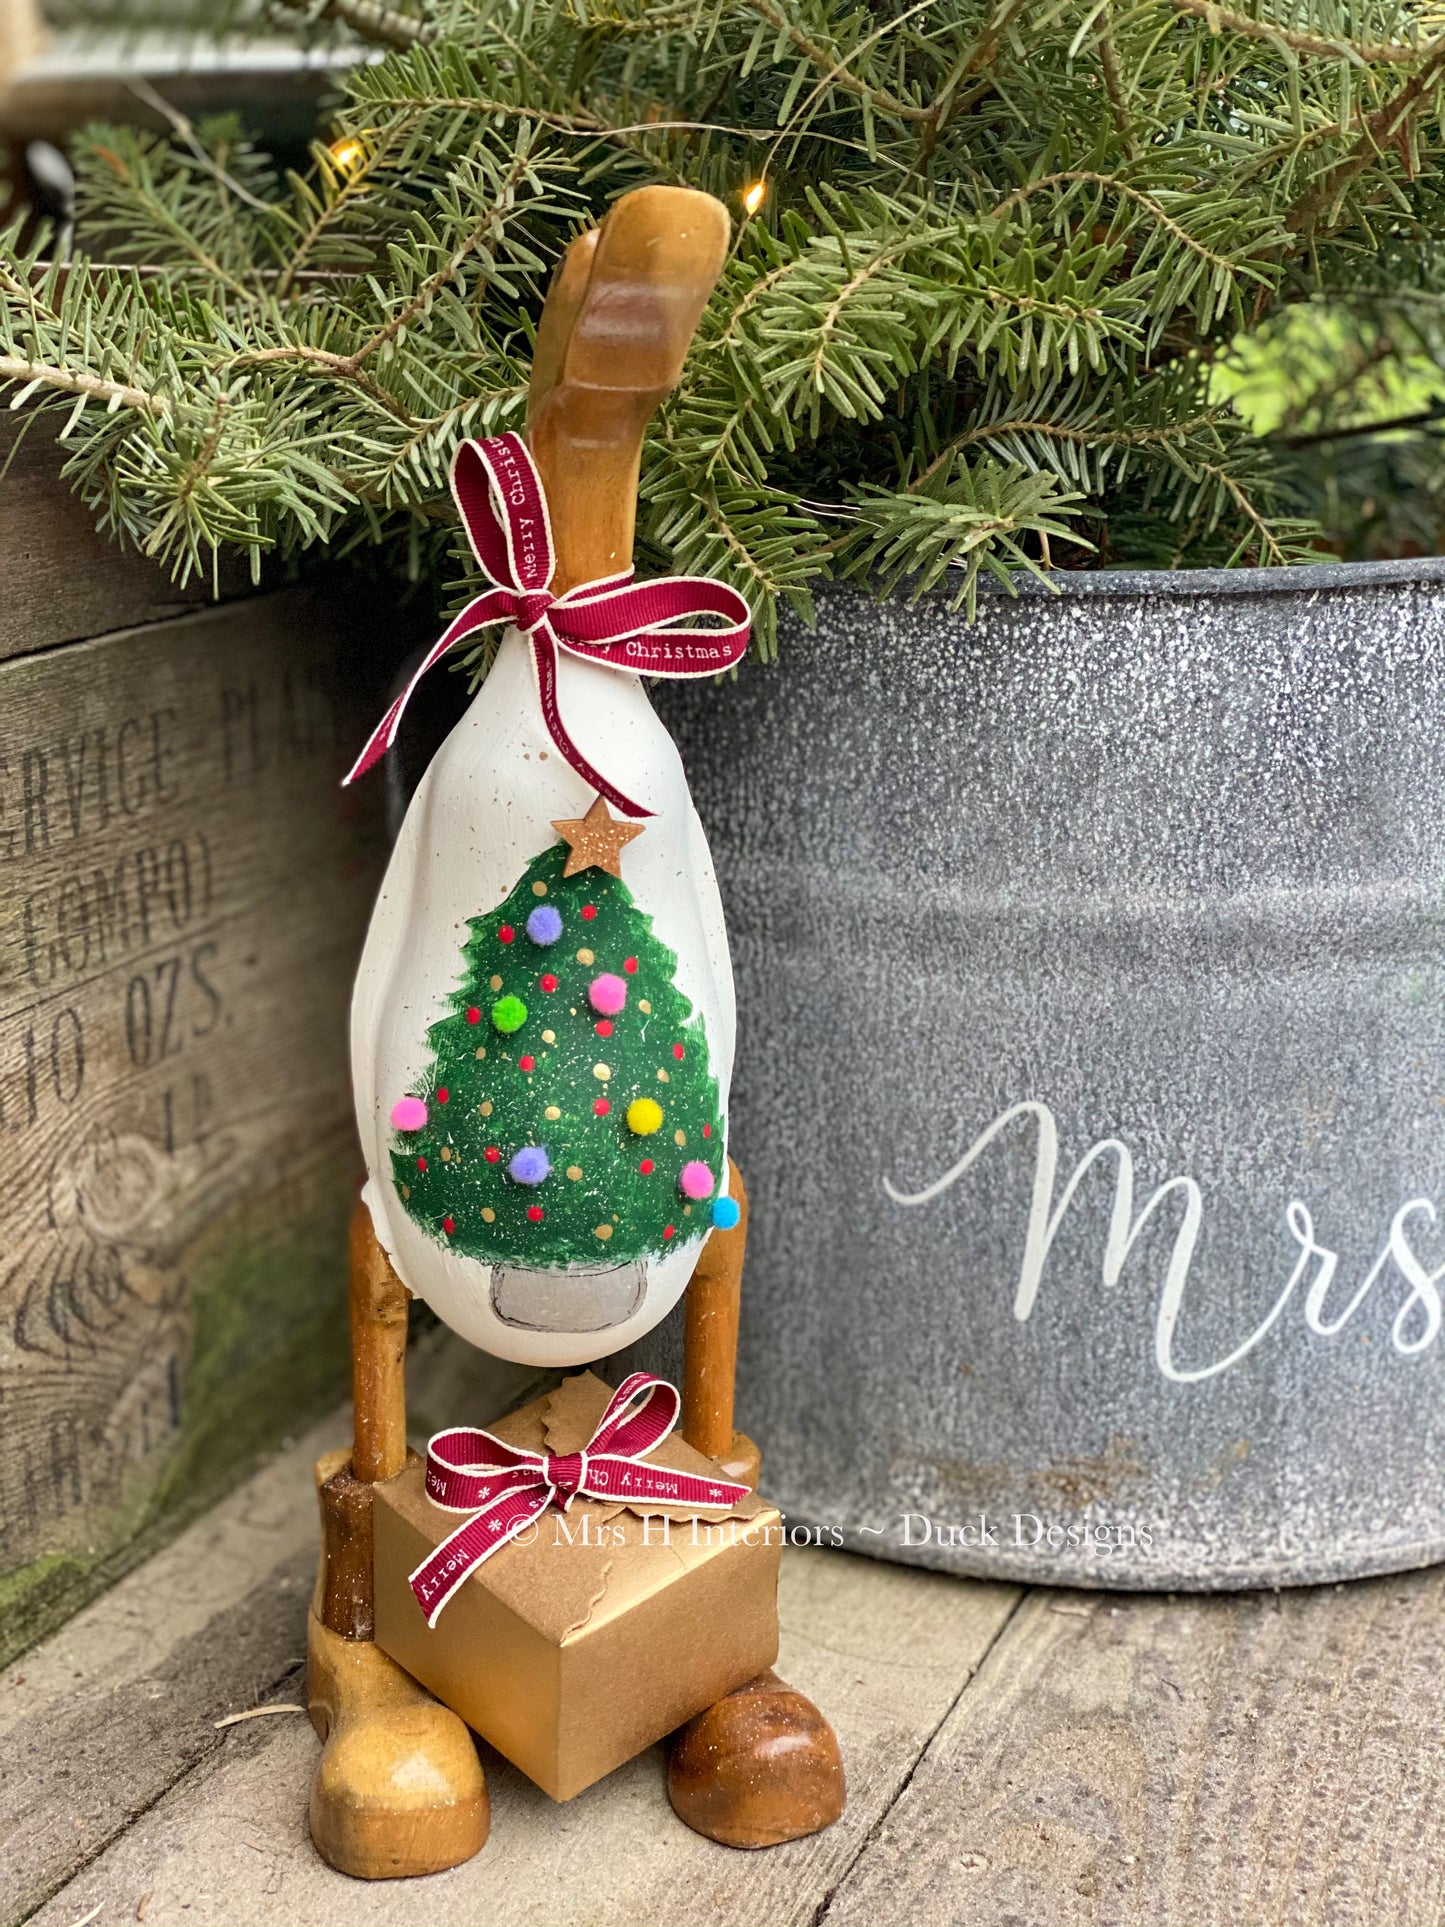 Oh Christmas tree - Decorated Wooden Duck in Boots by Mrs H the Duck Lady